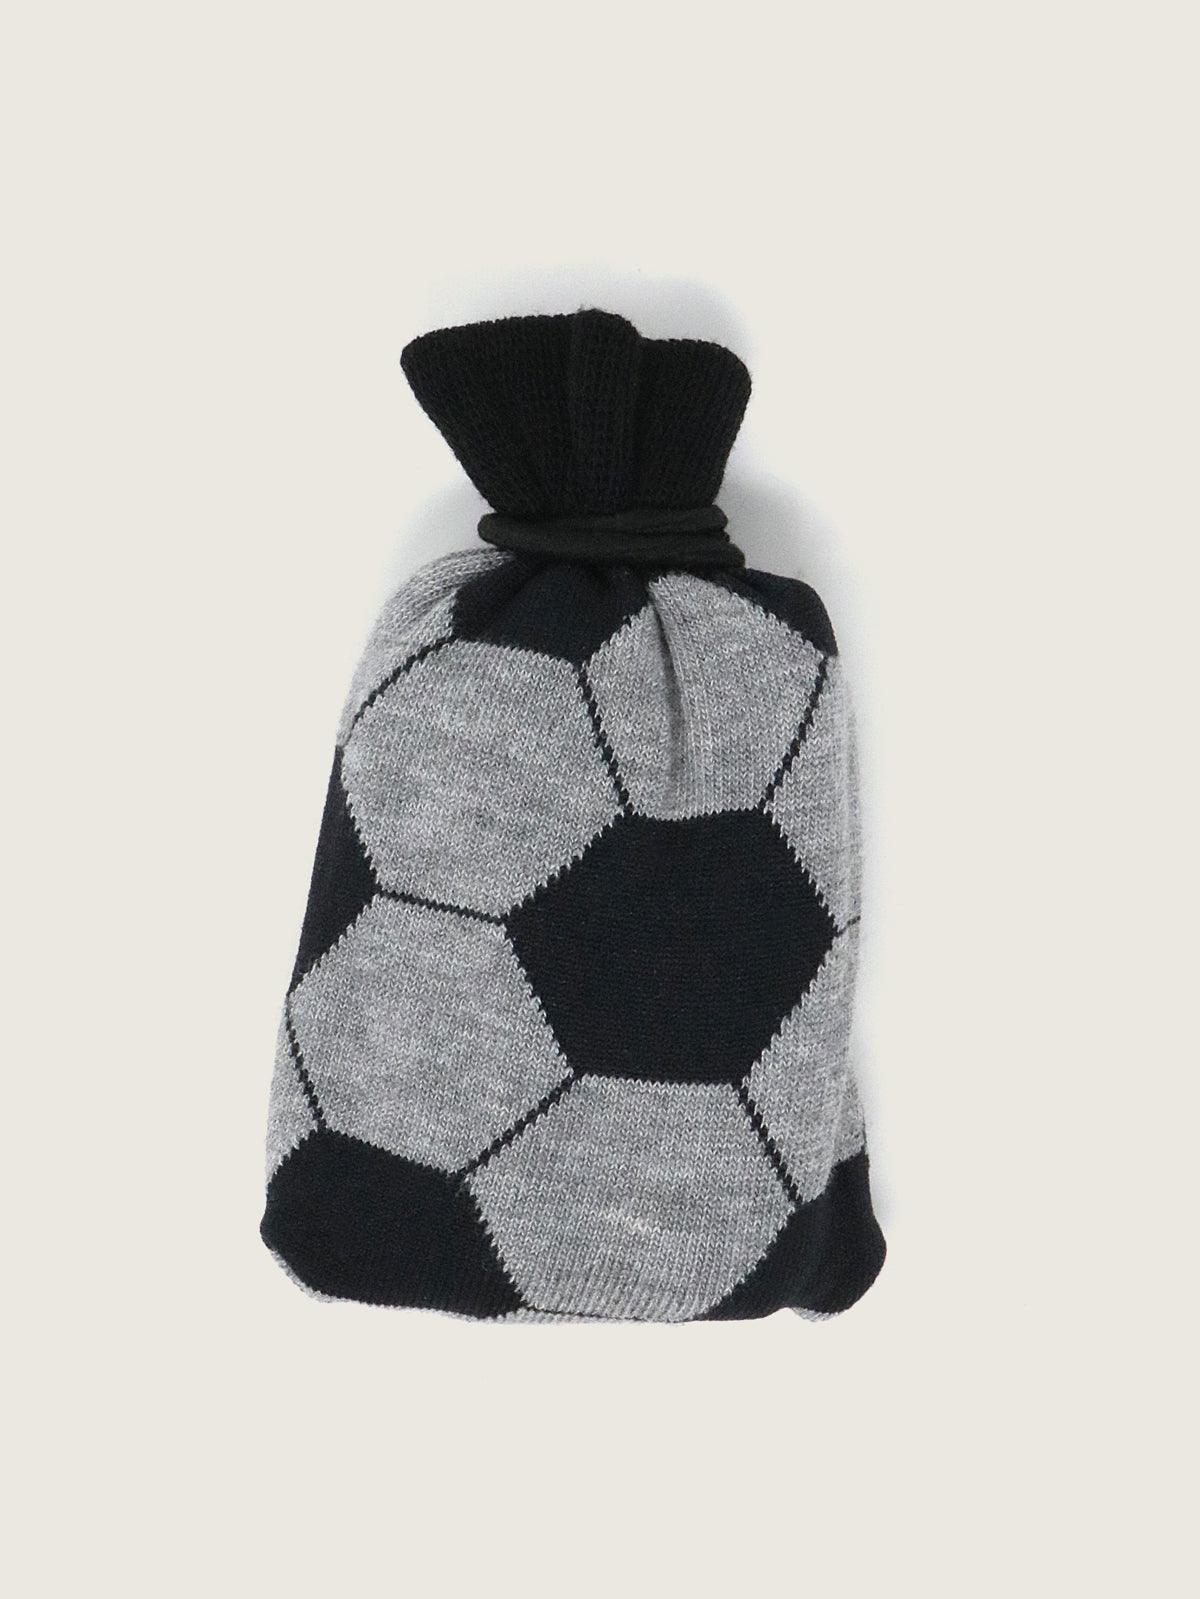 Gots Football Socks In A Bag - Grey Marle - Thought Clothing UK